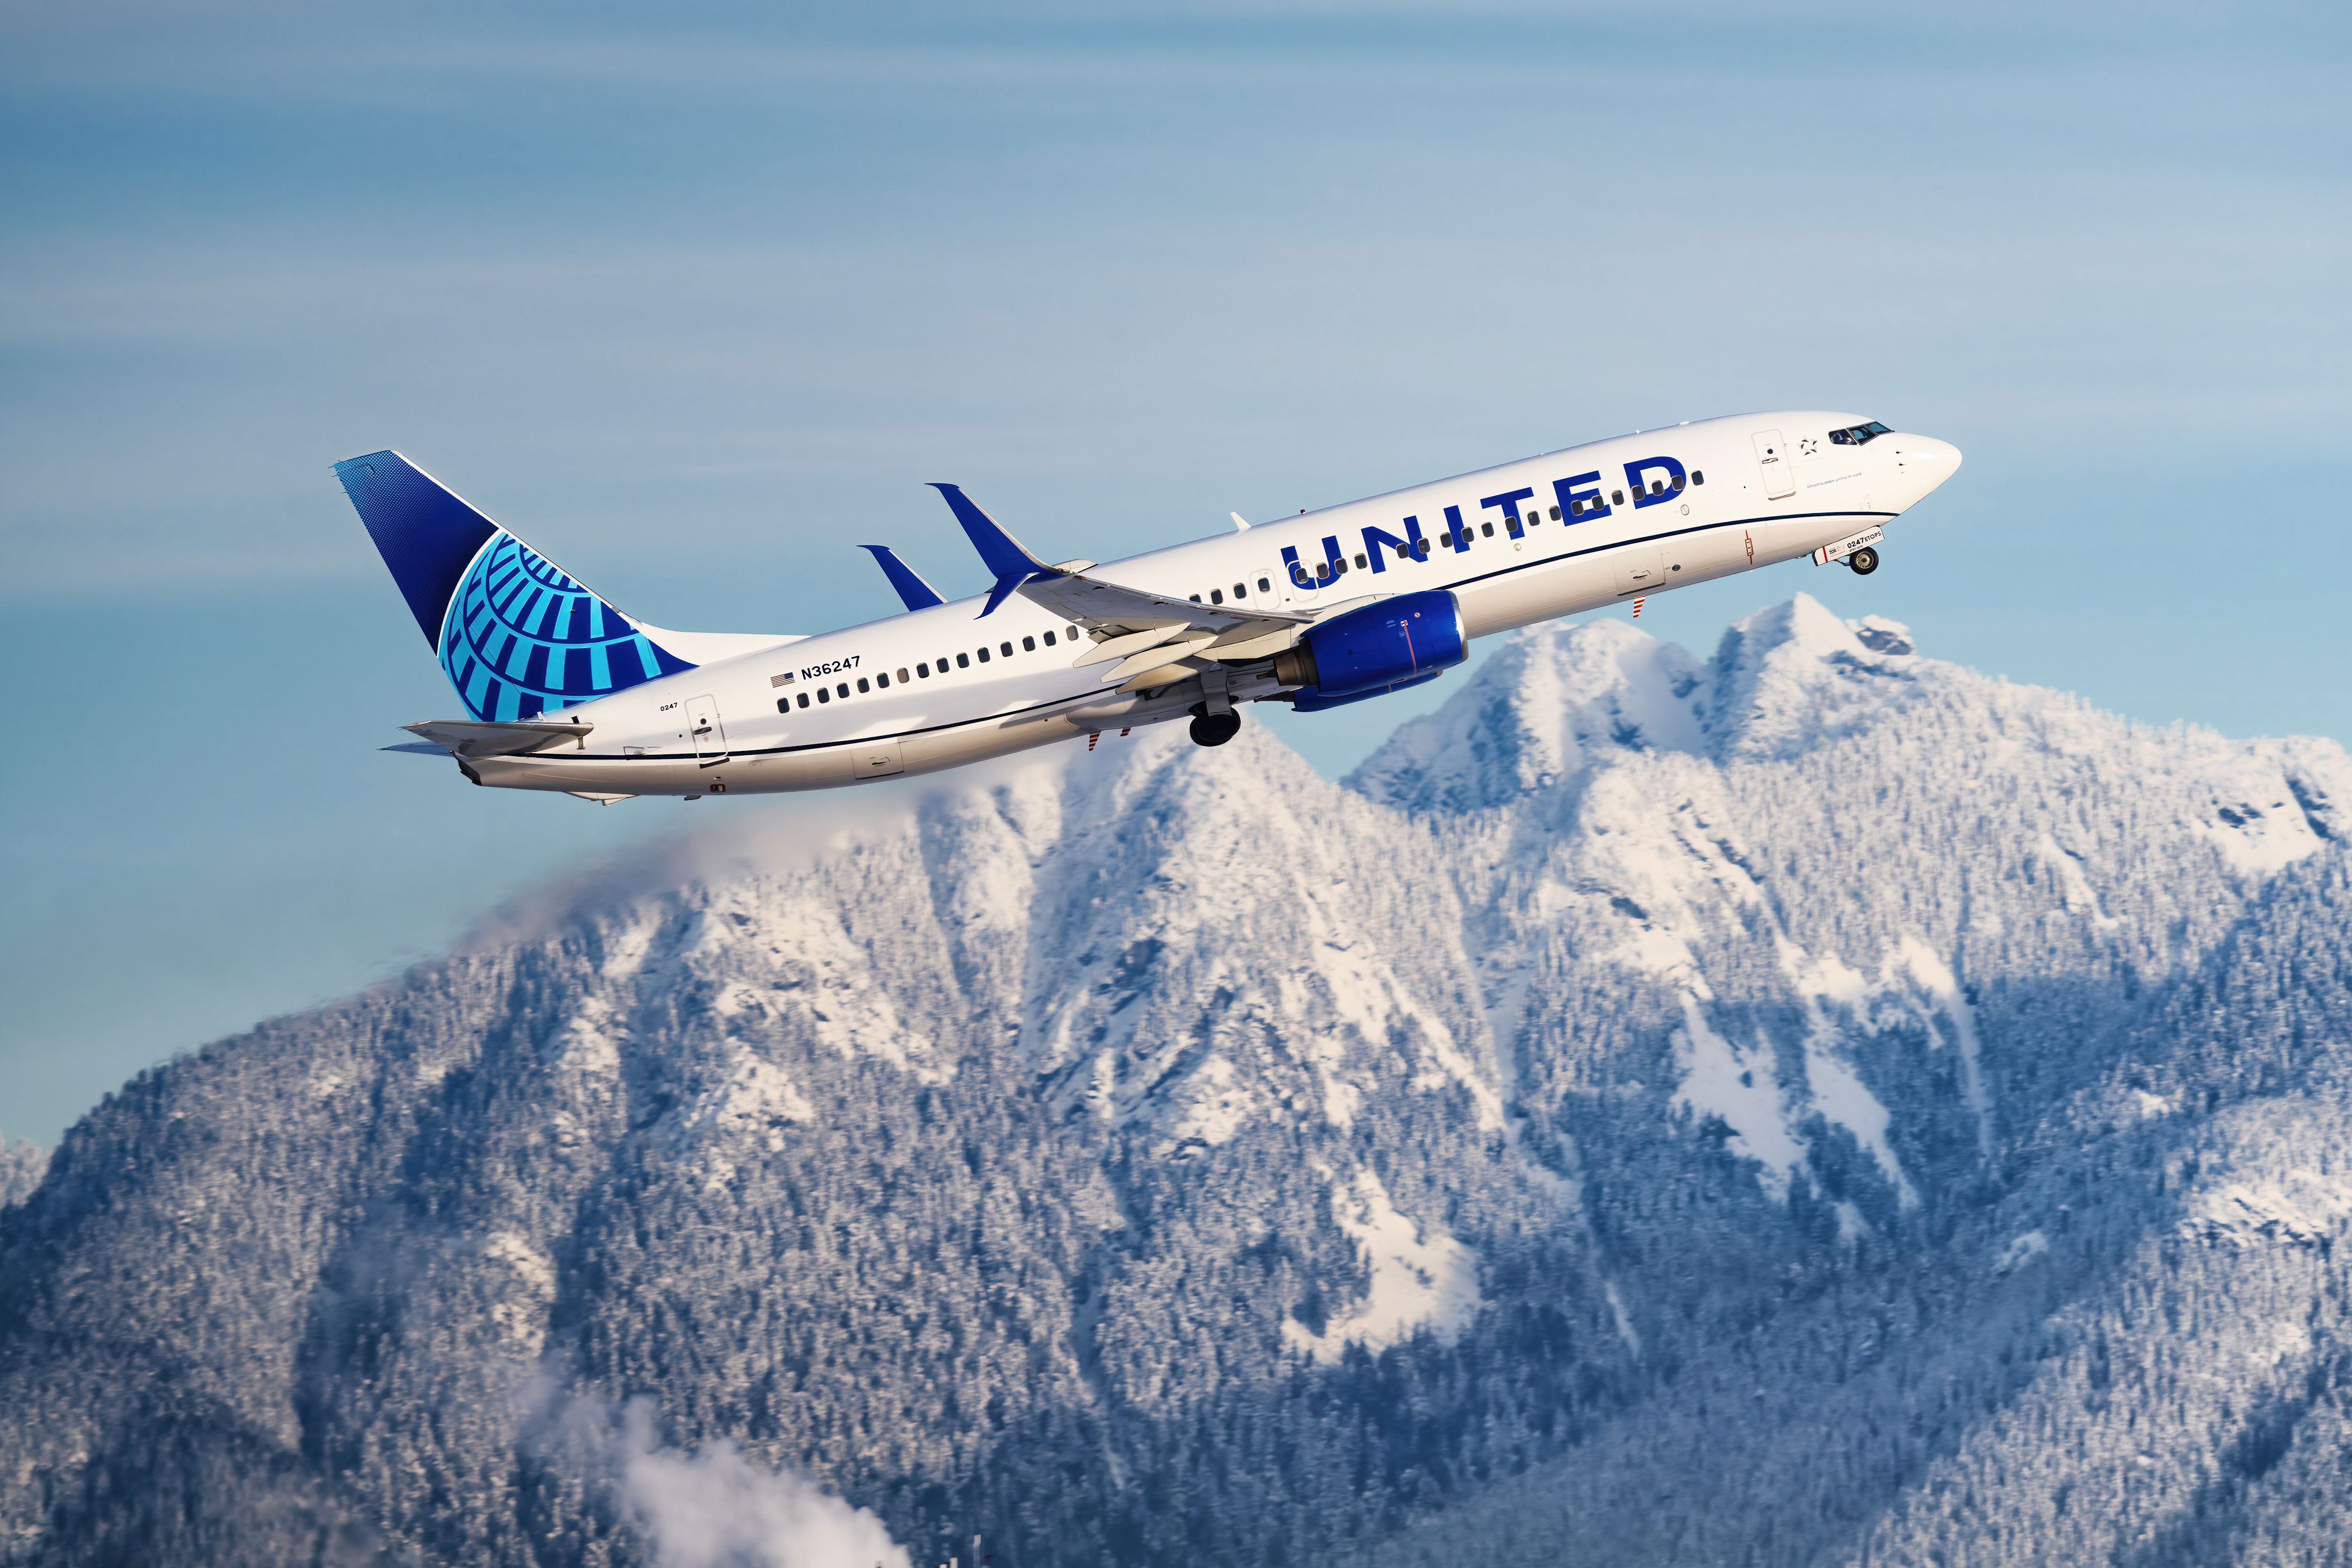 united airlines is adding a record-breaking number of flights to asia and the pacific